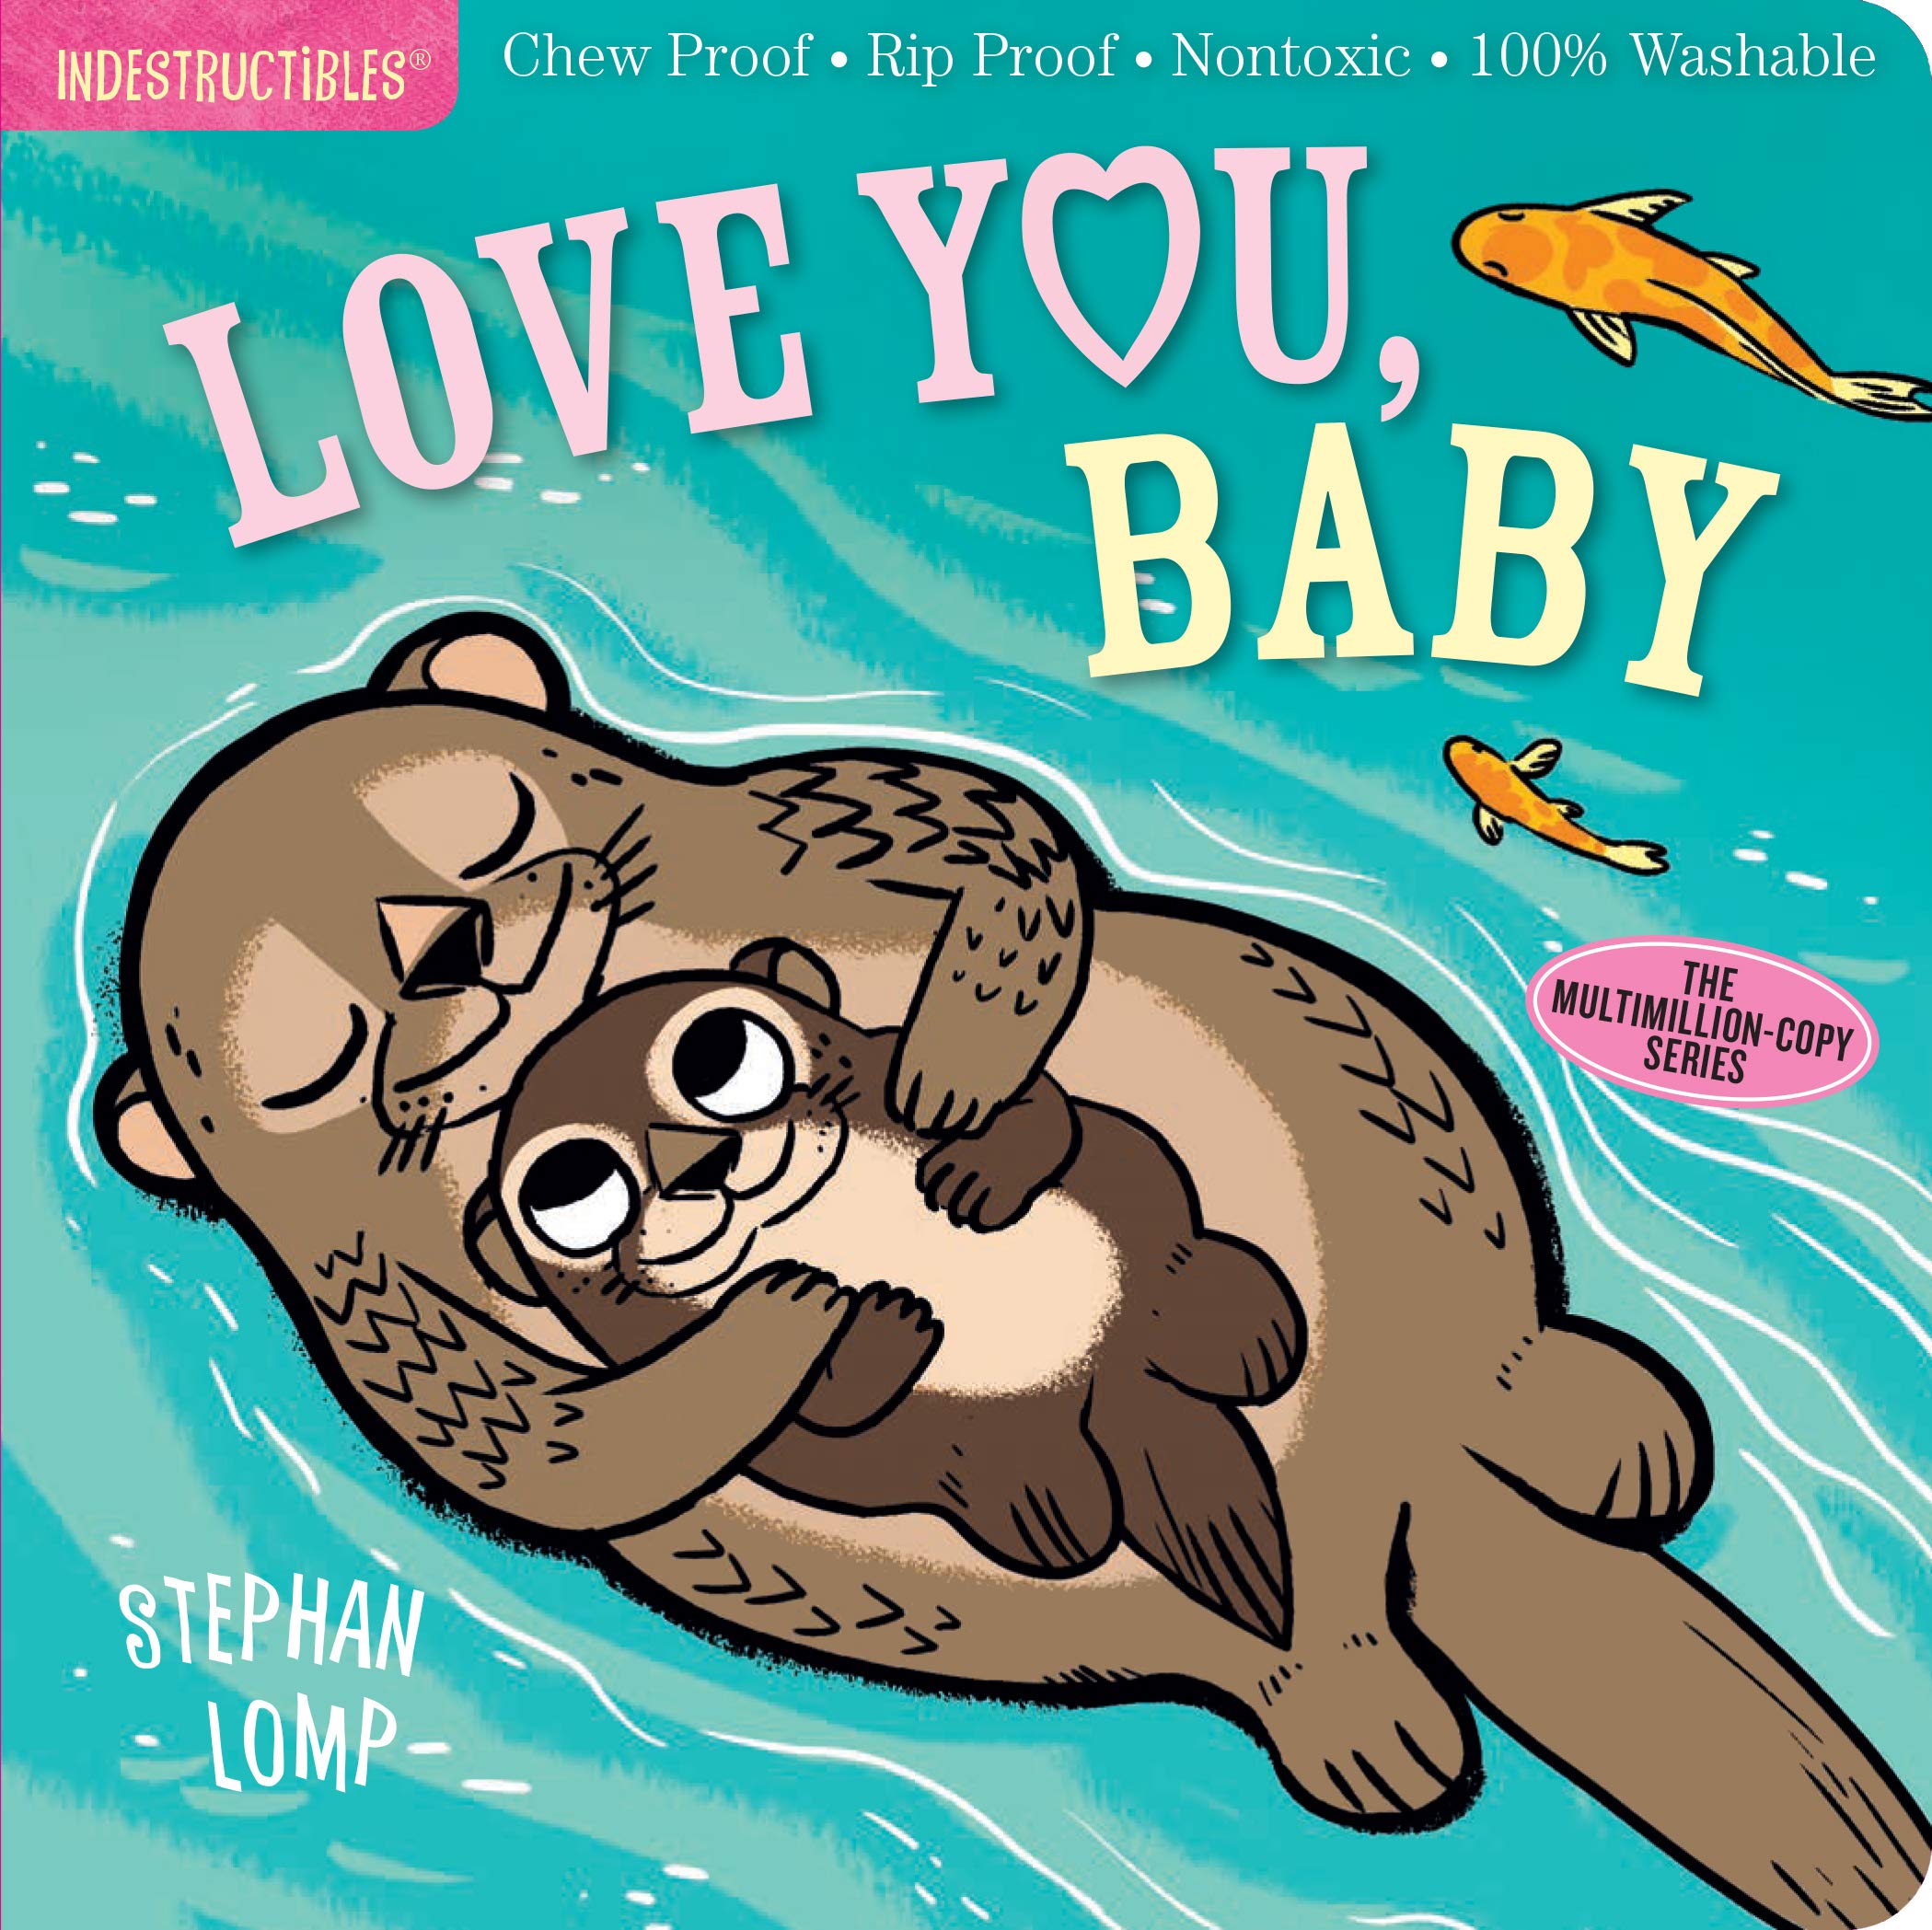 “Indestructibles: Love You, Baby” Book